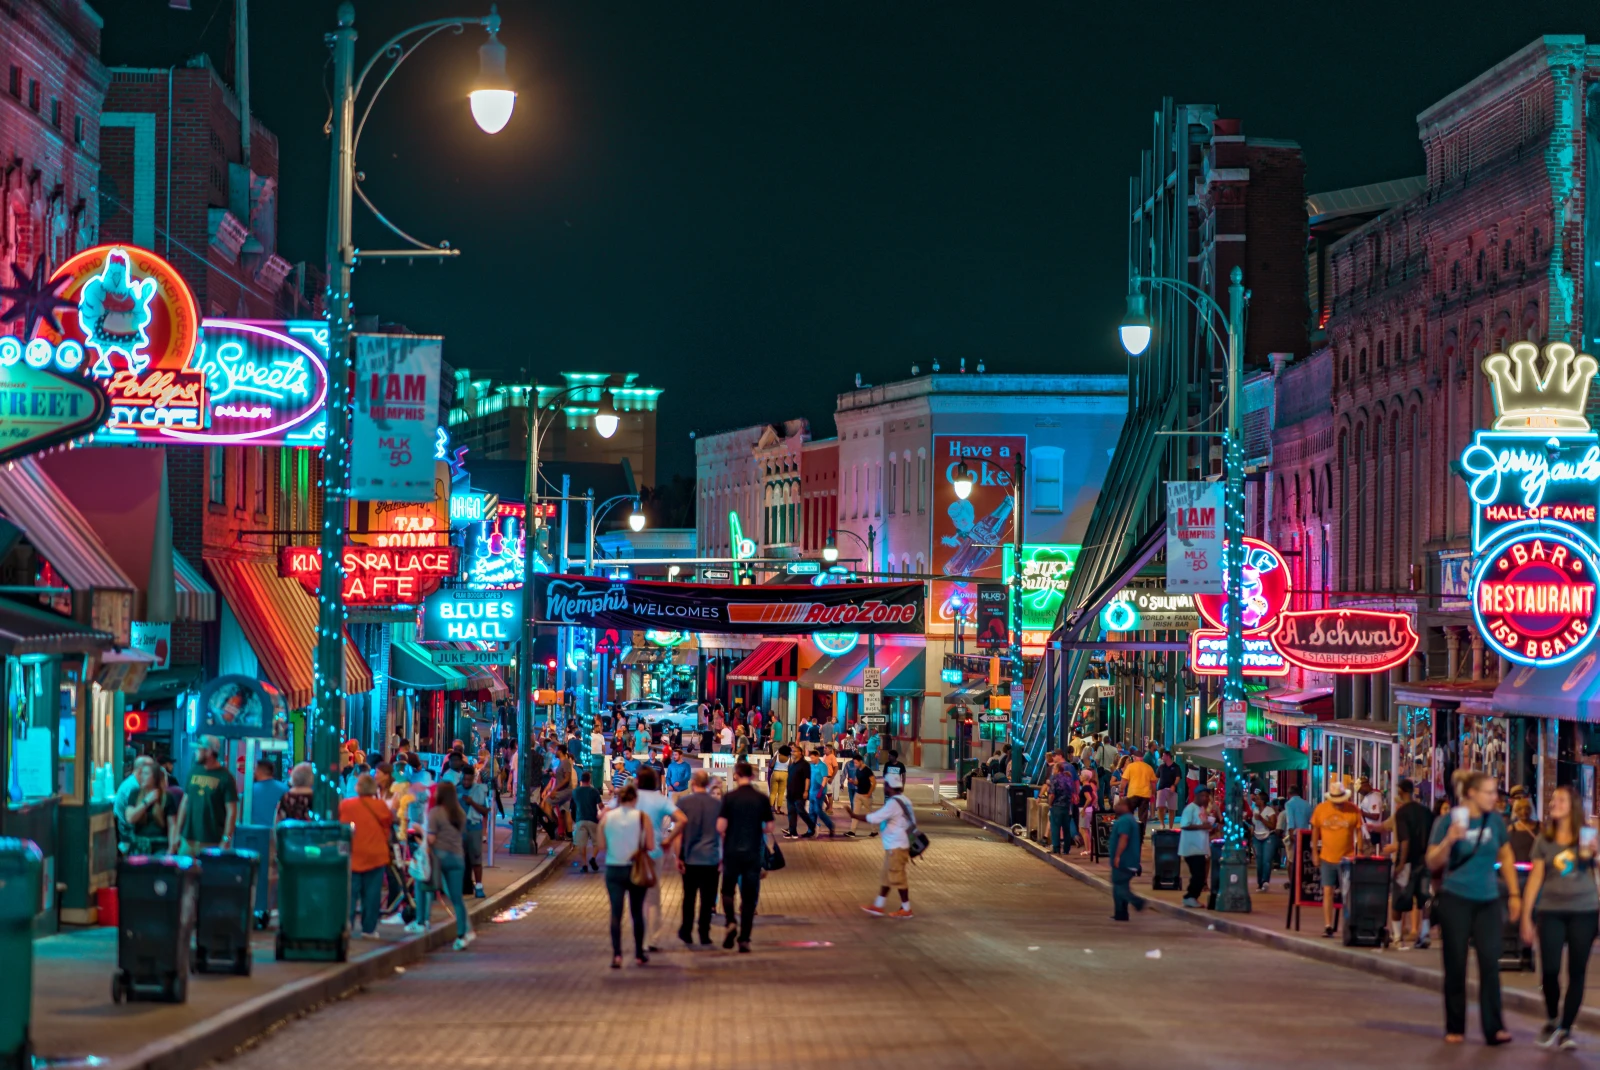 Street way in Memphis, Tennessee lined with colorful neon signs